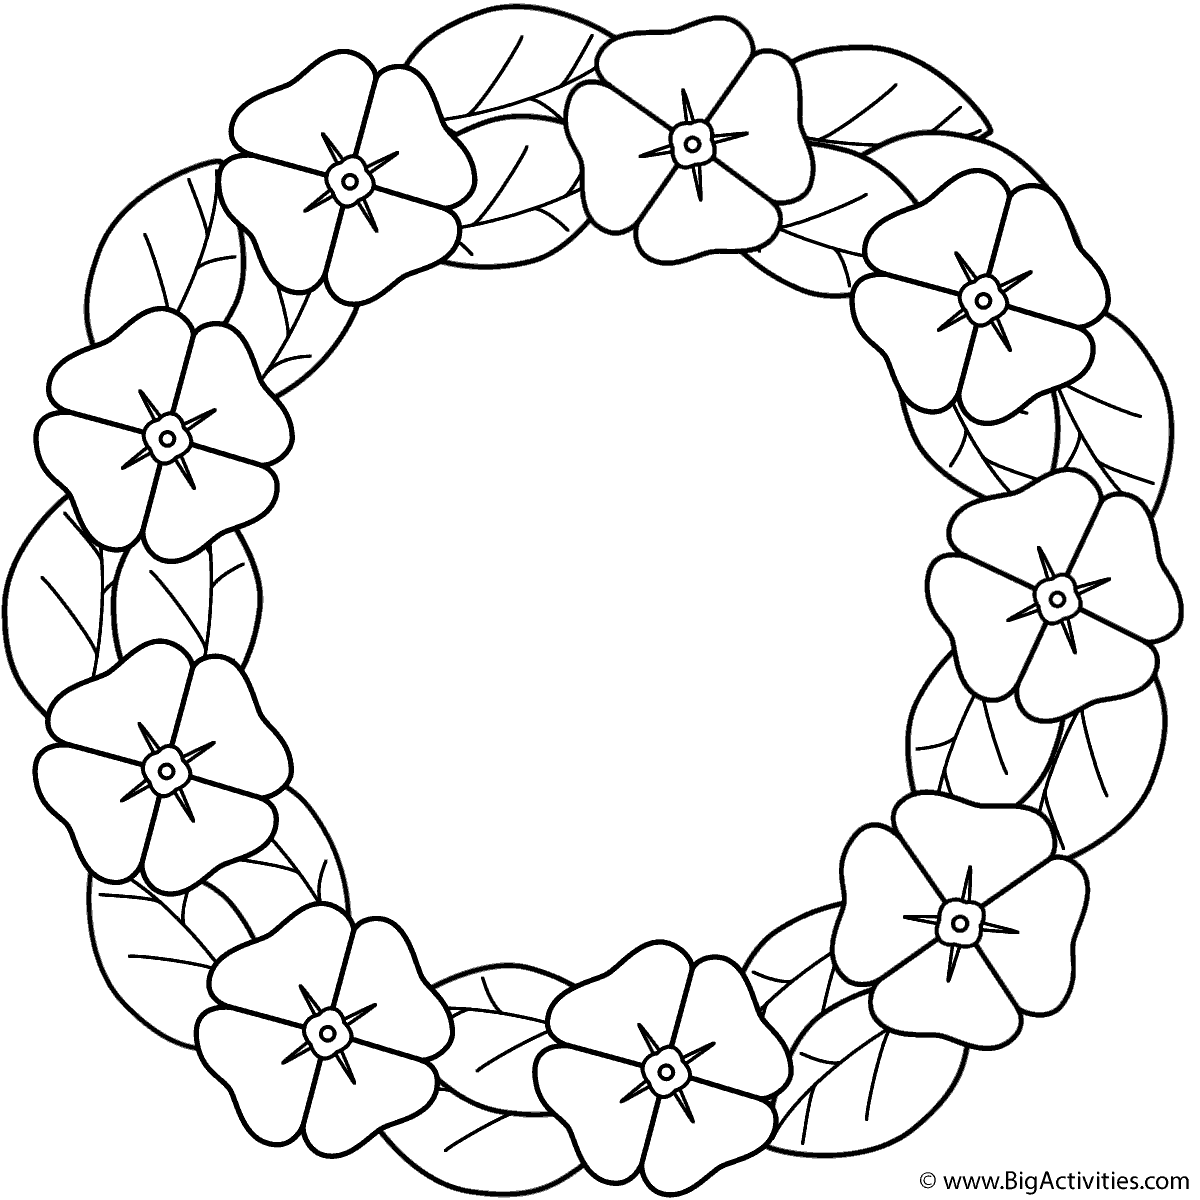 Poppy wreath Coloring Page (Remembrance Day)